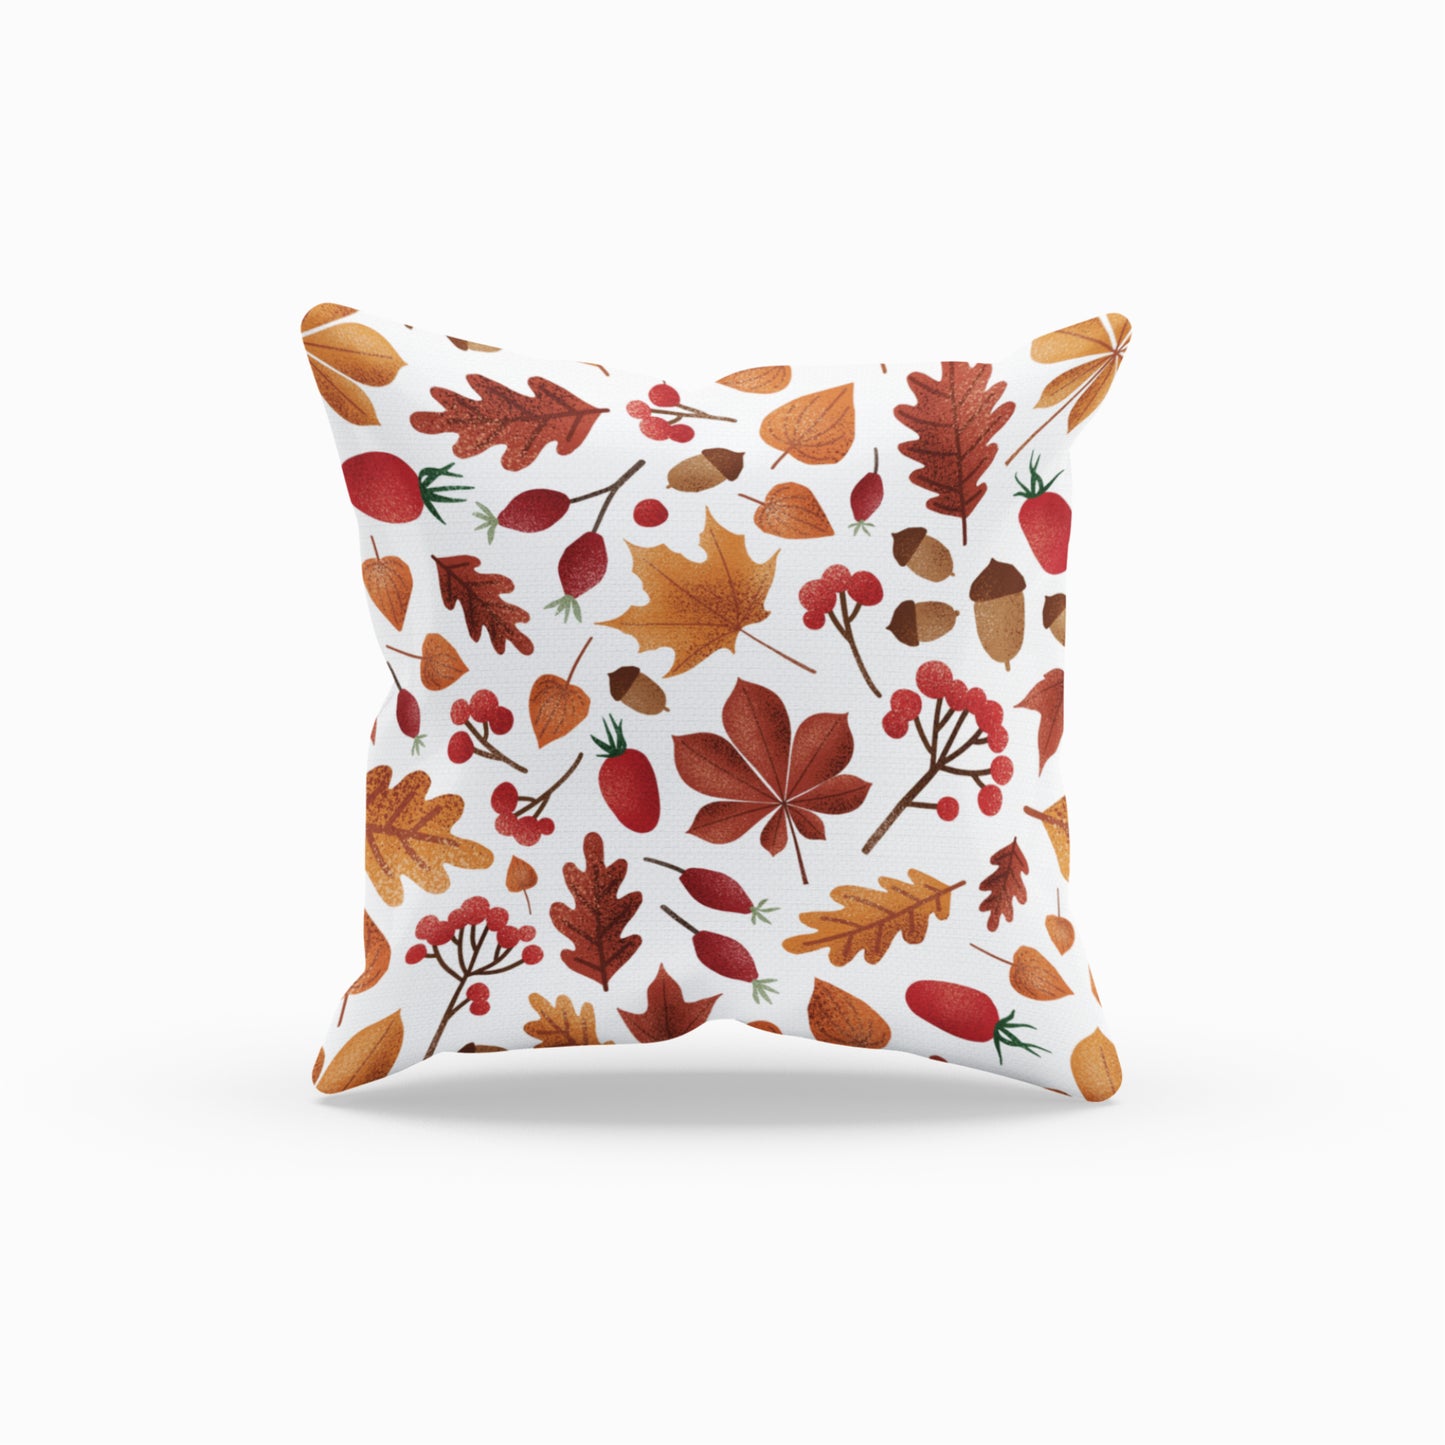 Fall Leaves Pillow Cover, Autumn Living Room Decor Pillow Case by Homeezone